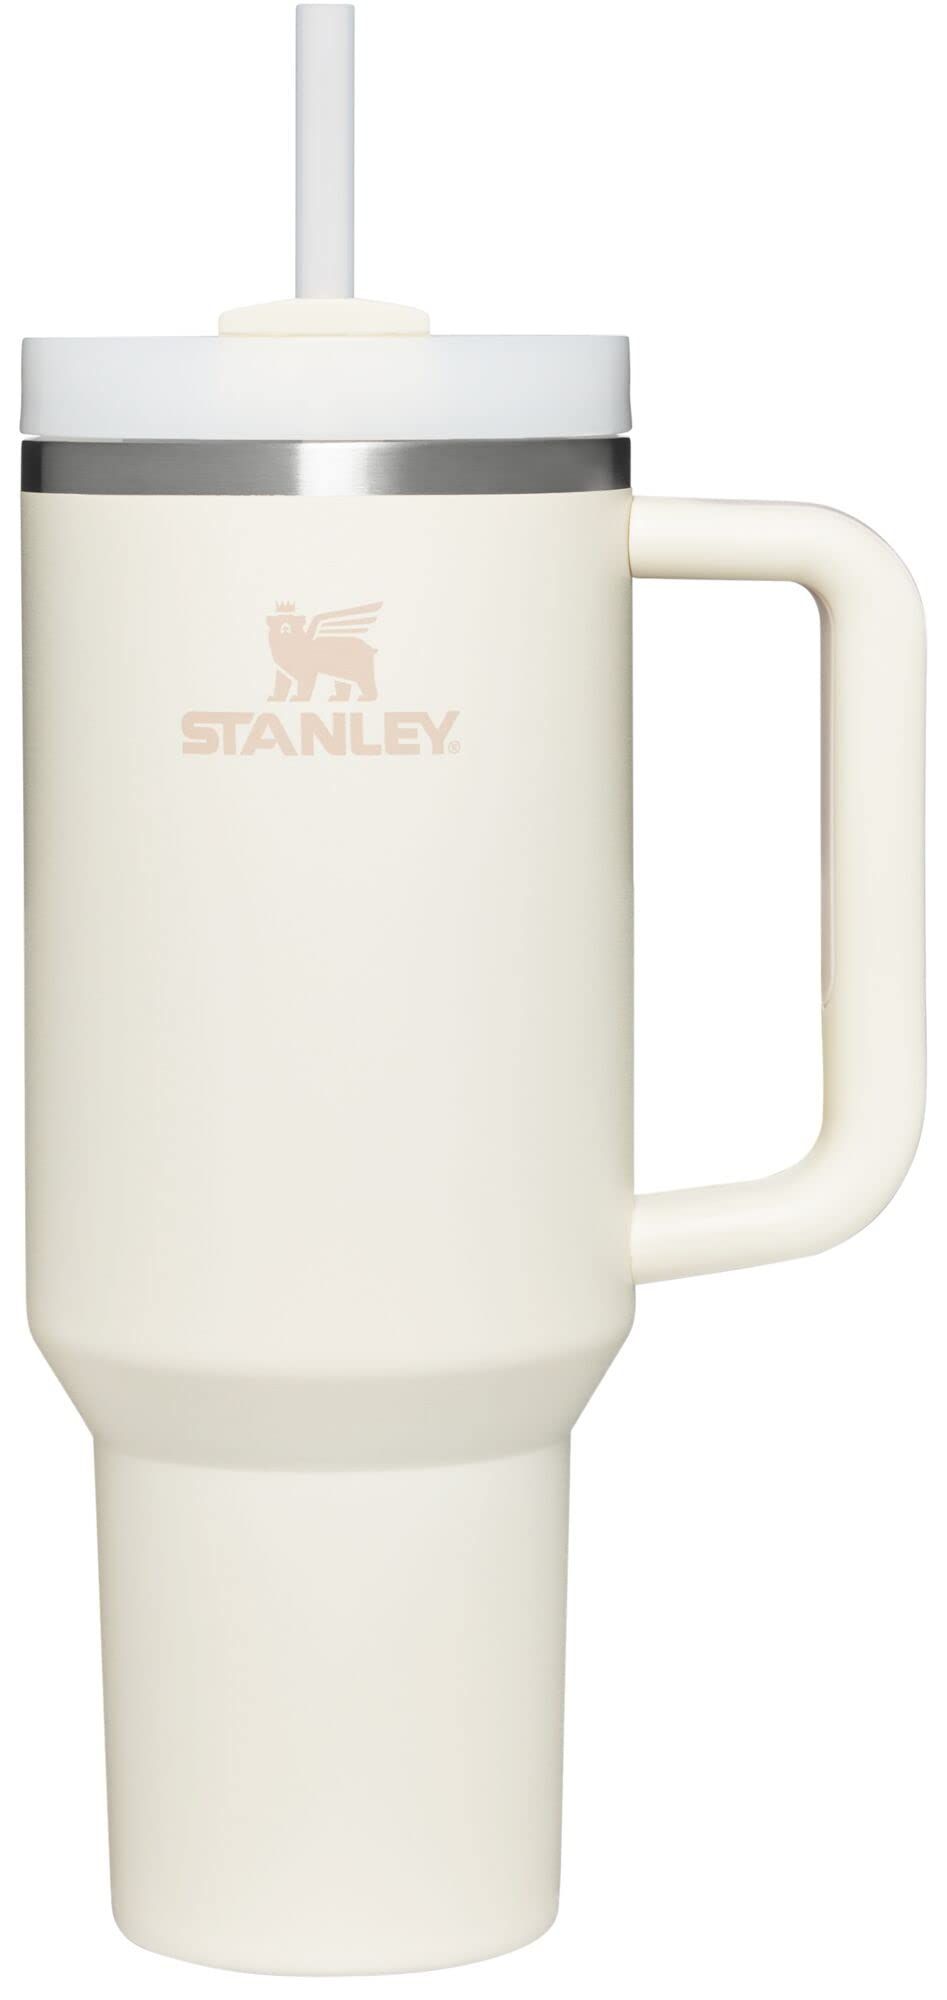 Stanley Mug Survives Car Fire, Company Offers to Replace Vehicle